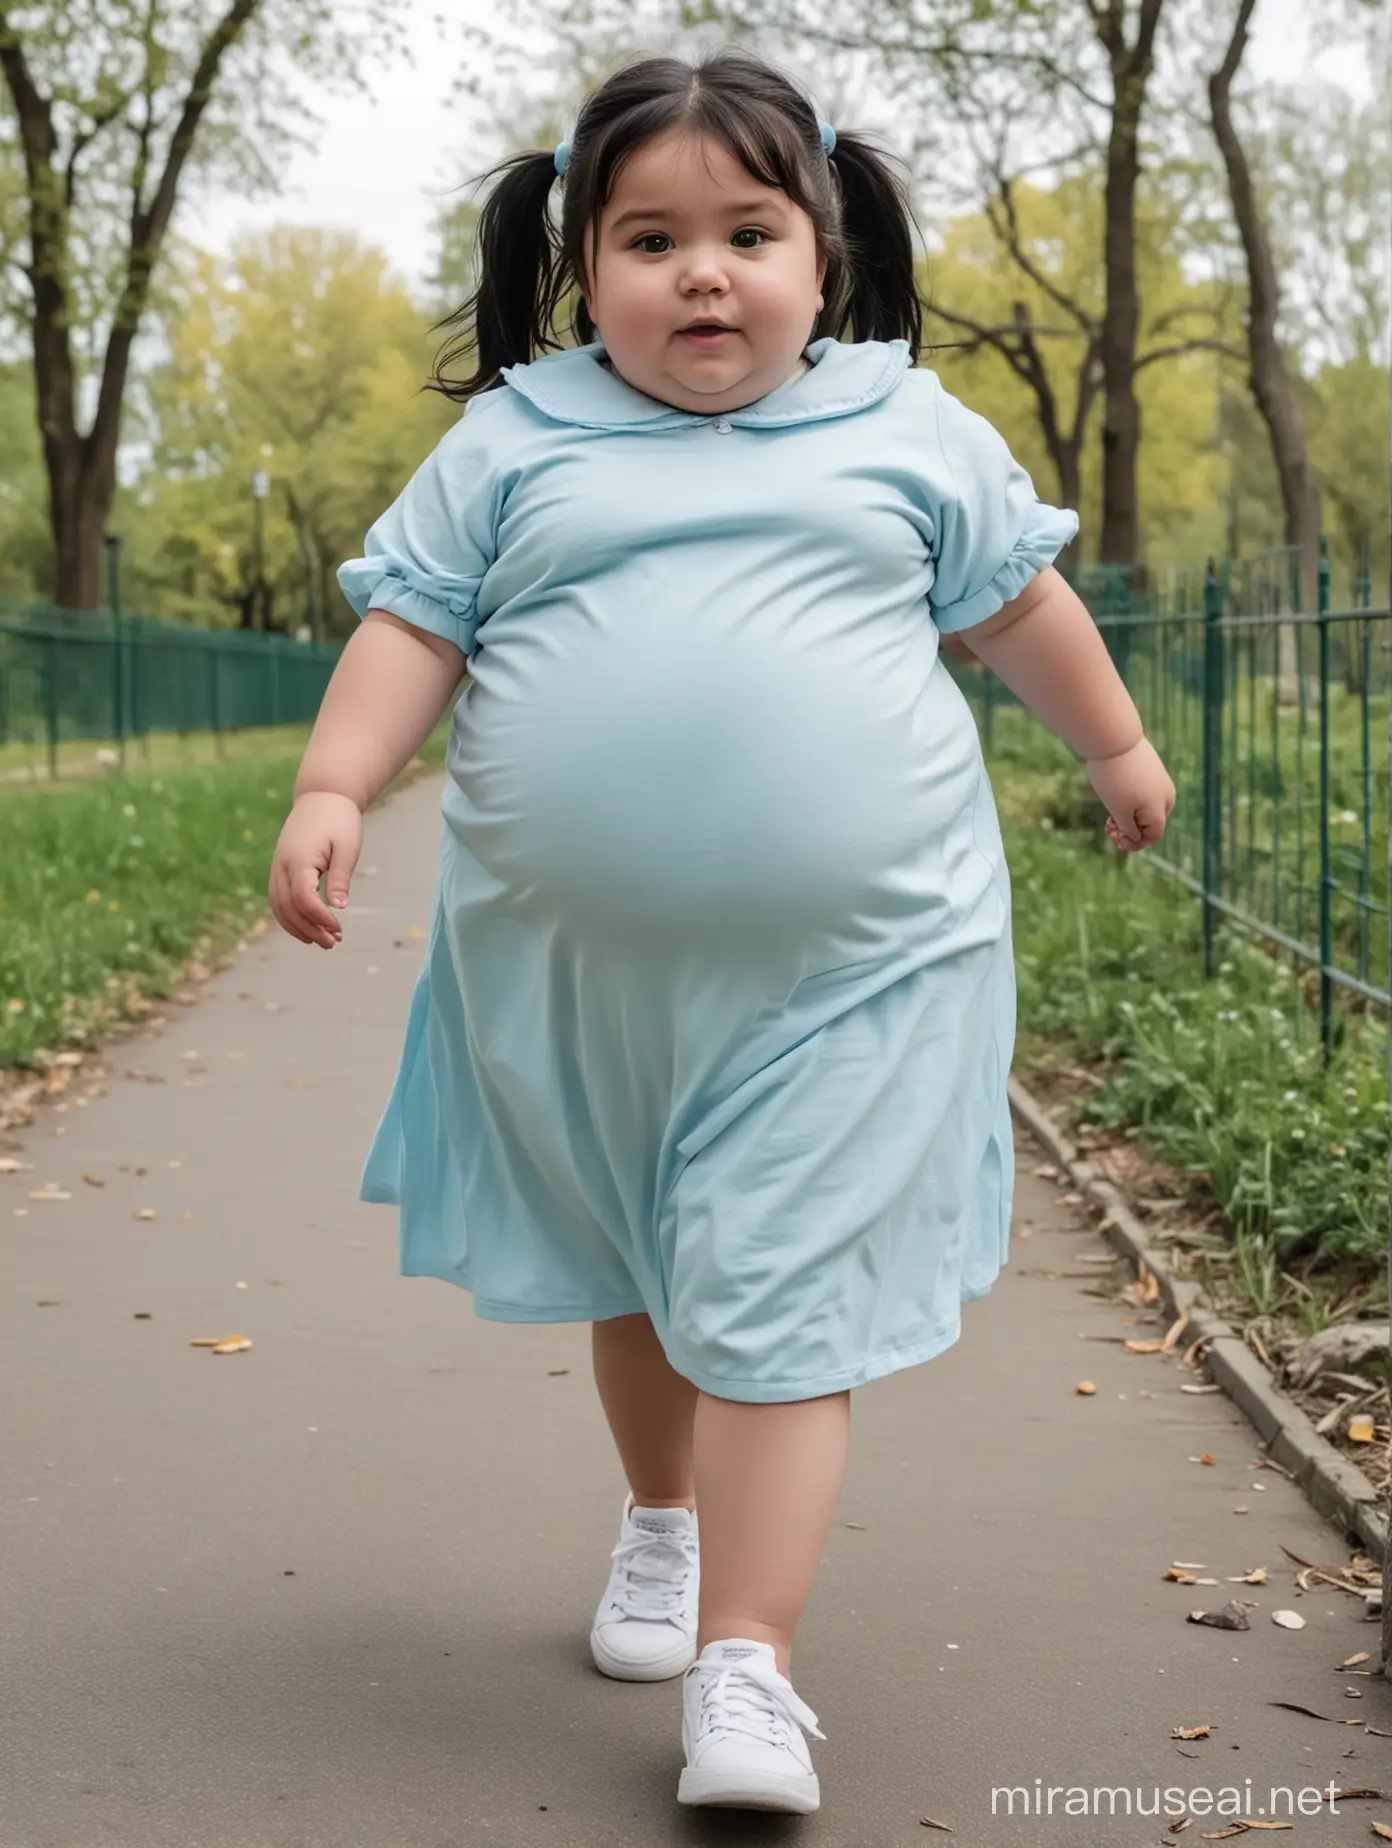 A very fat little girl, black hair, very fat and big body, light blue clothes, walking in the park